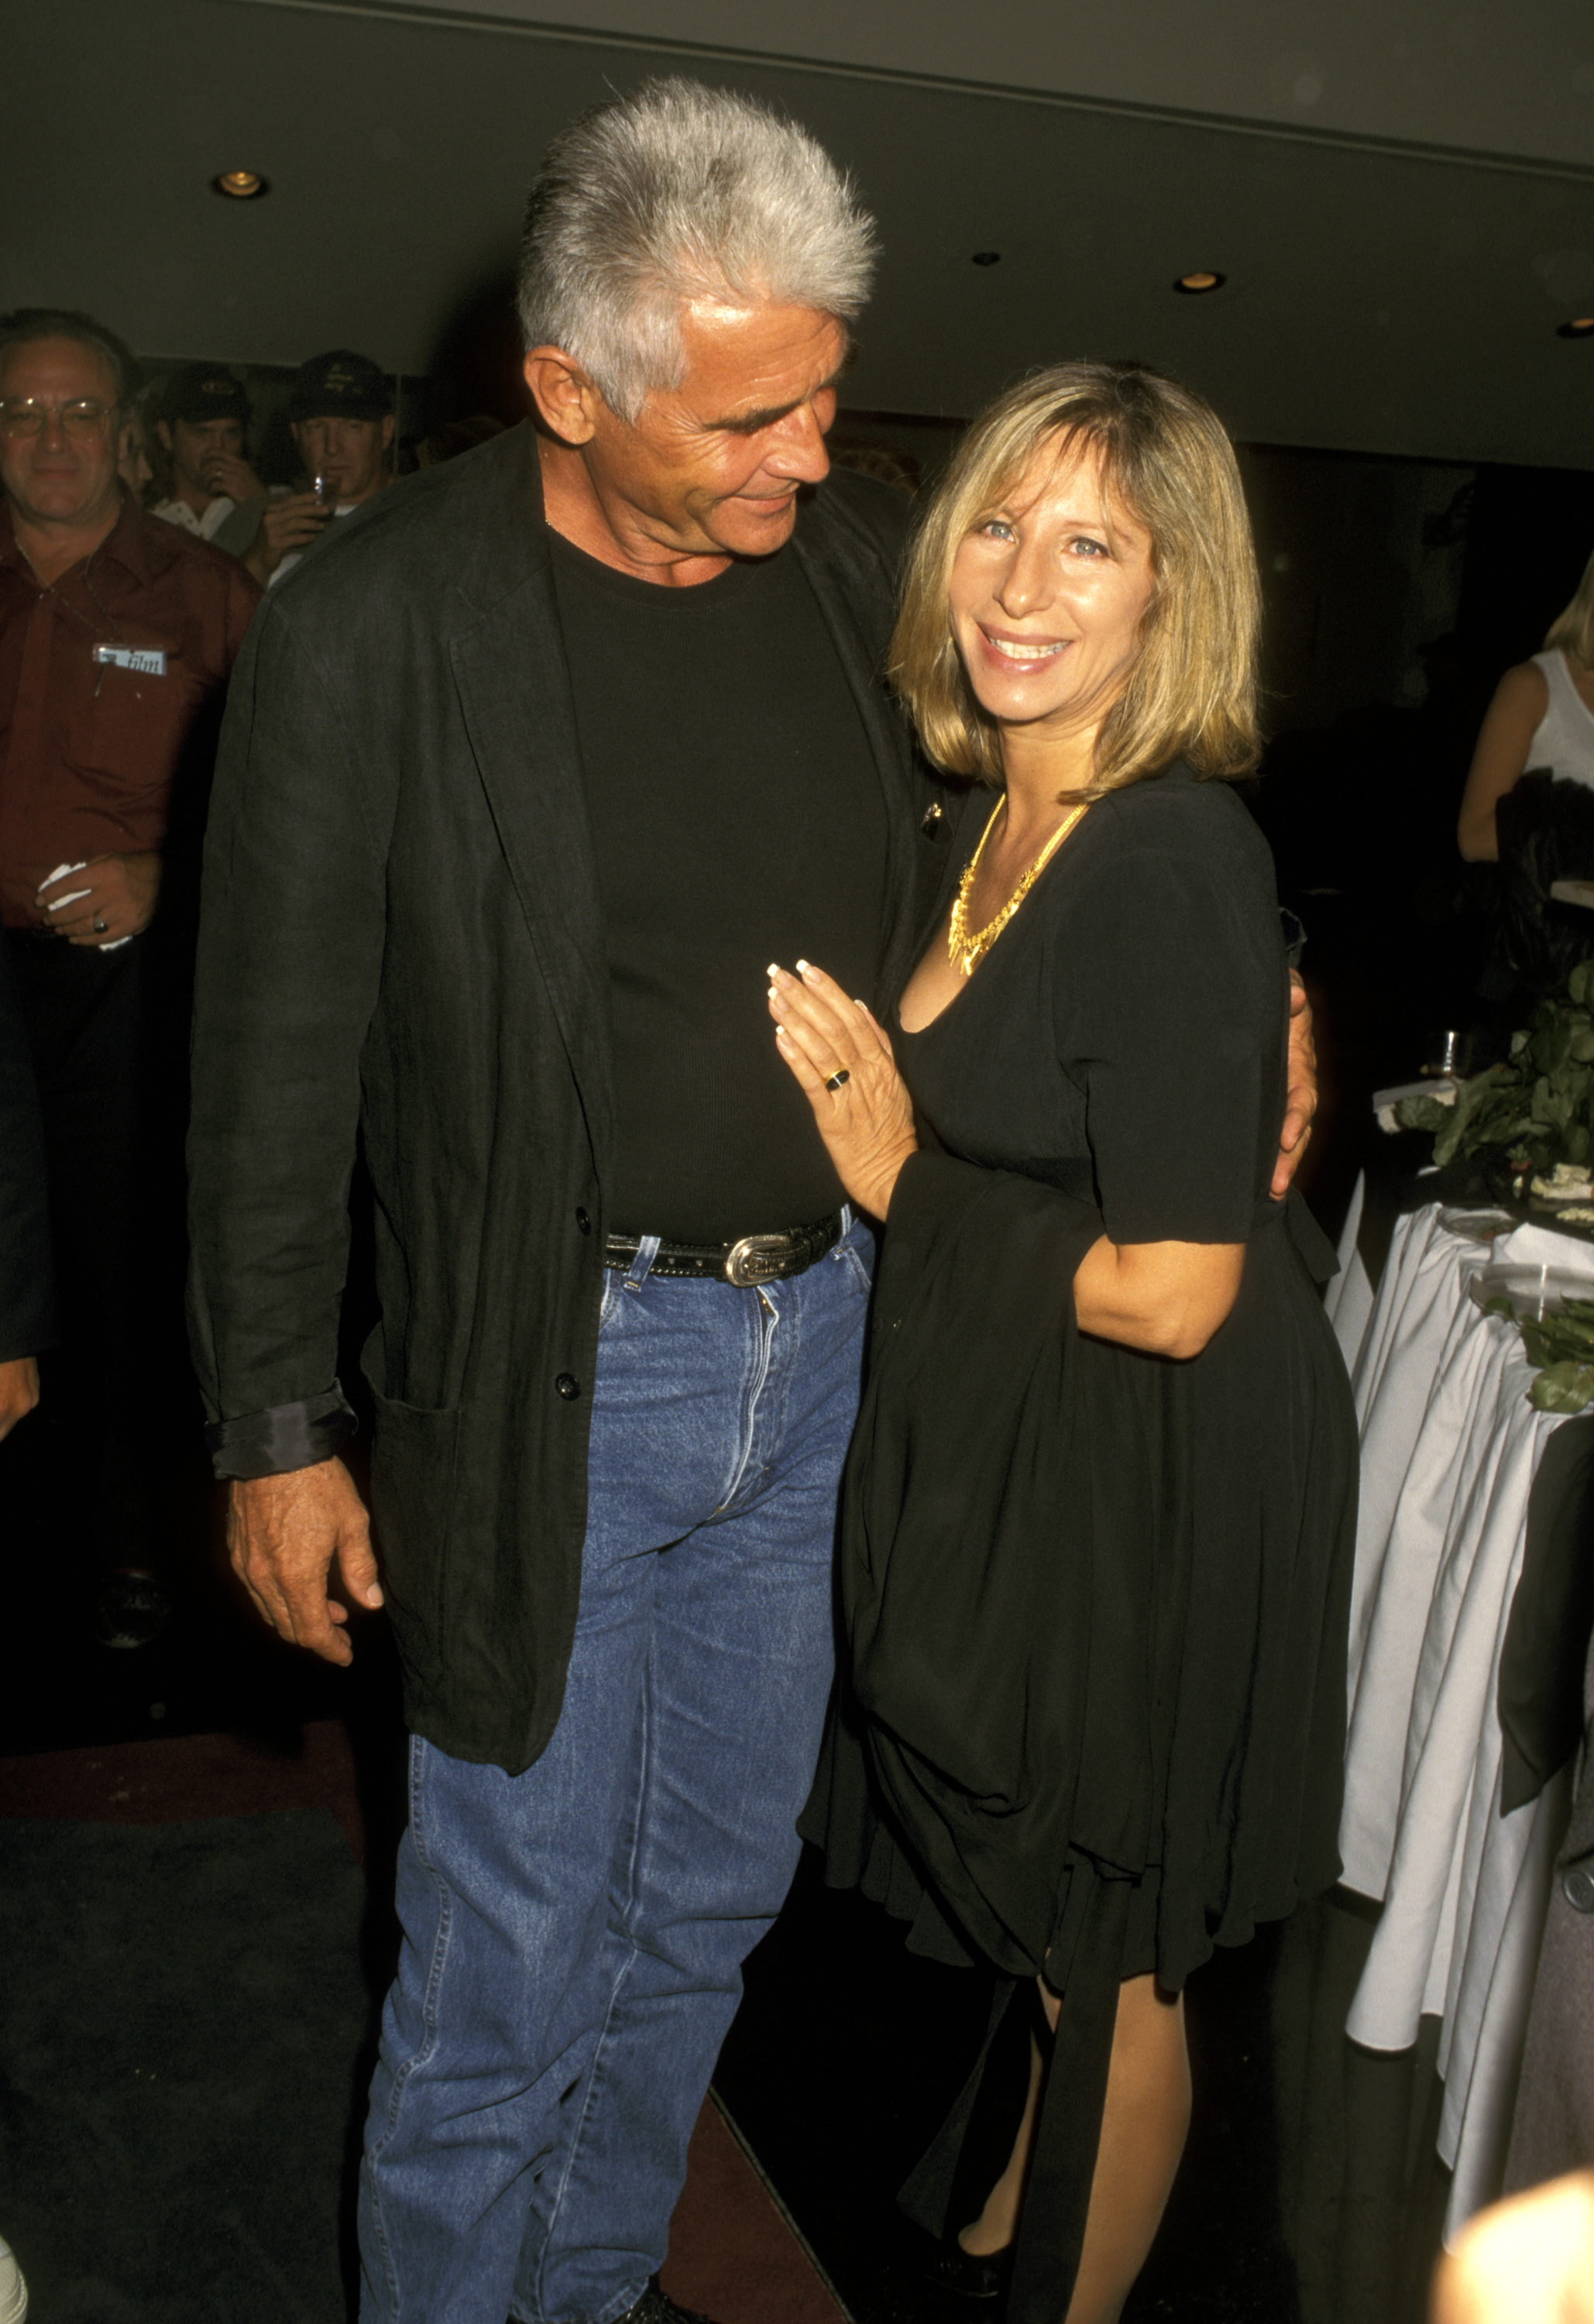 James Brolin and Barbra Streisand at the screening of "My Brother's War" in Los Angeles, California in 1997 | Source: Getty Images